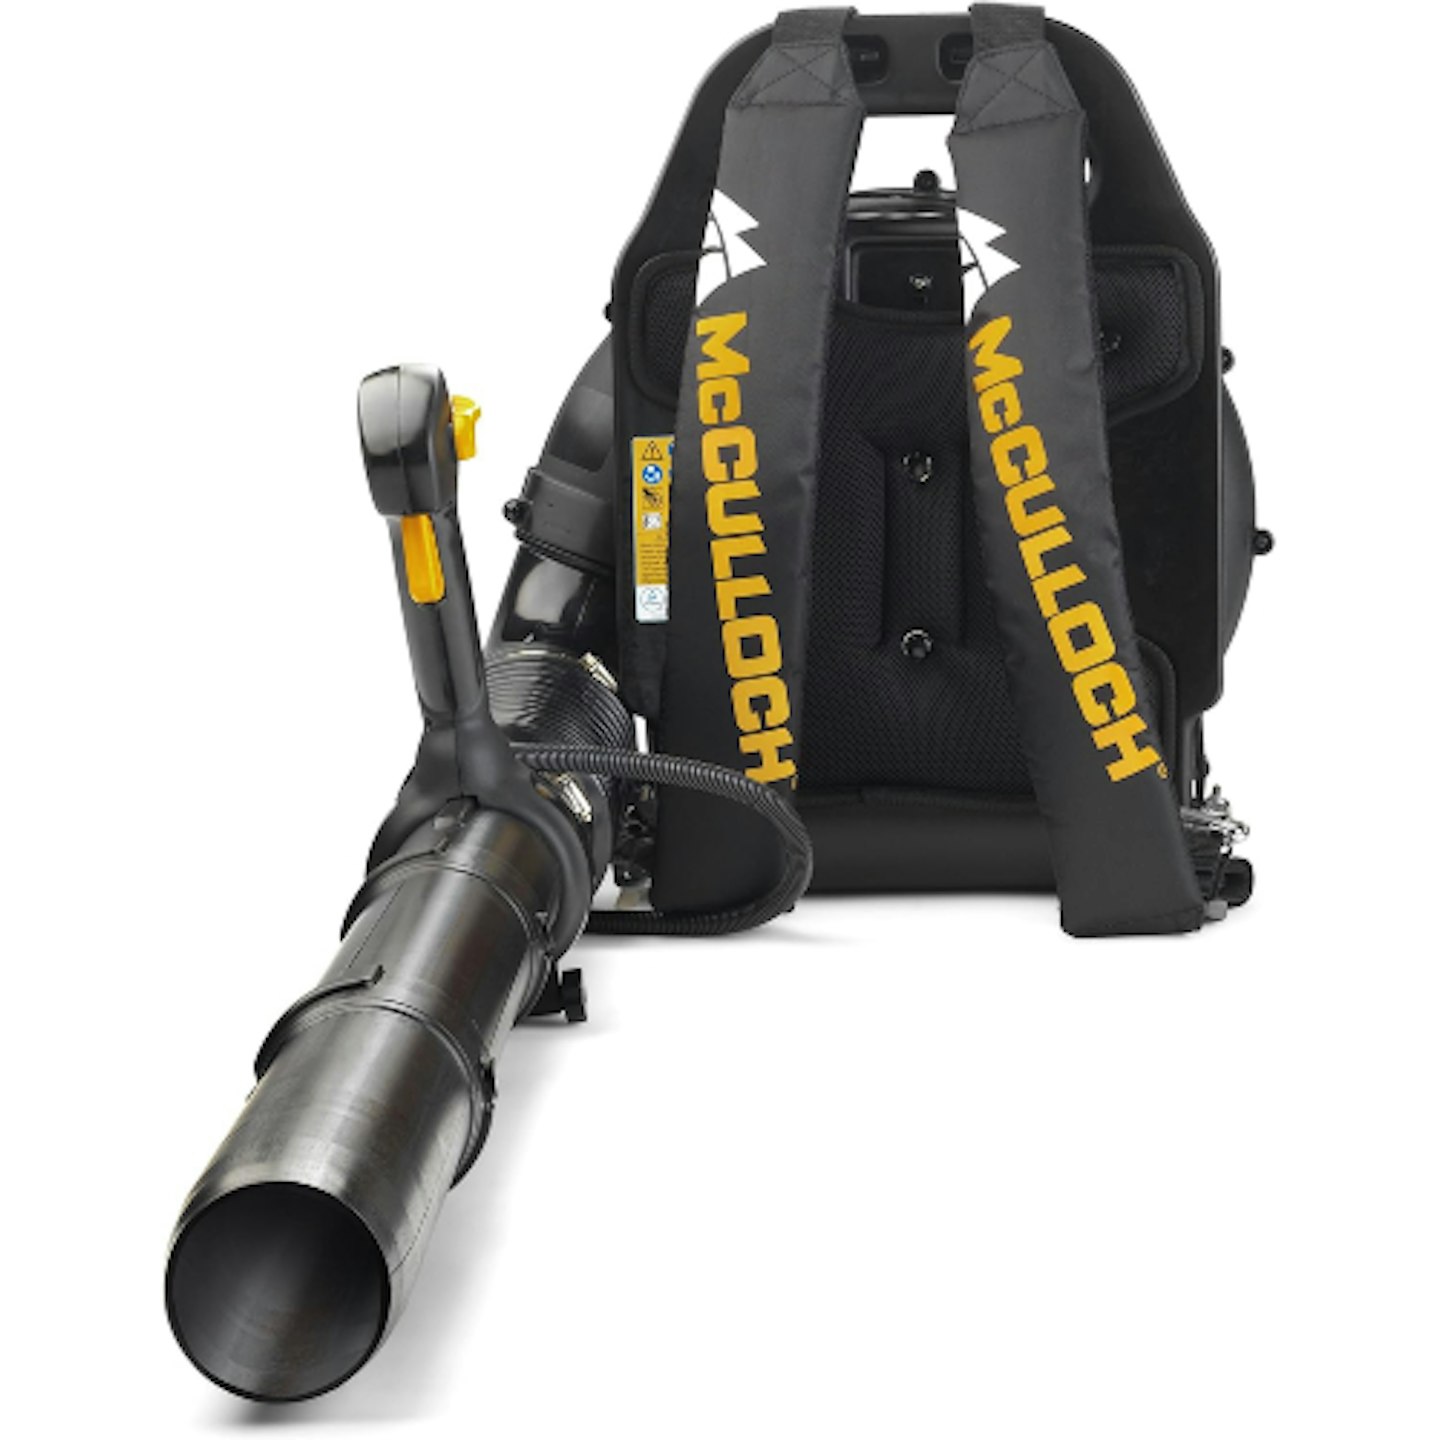 McCulloch backpack leaf blower 